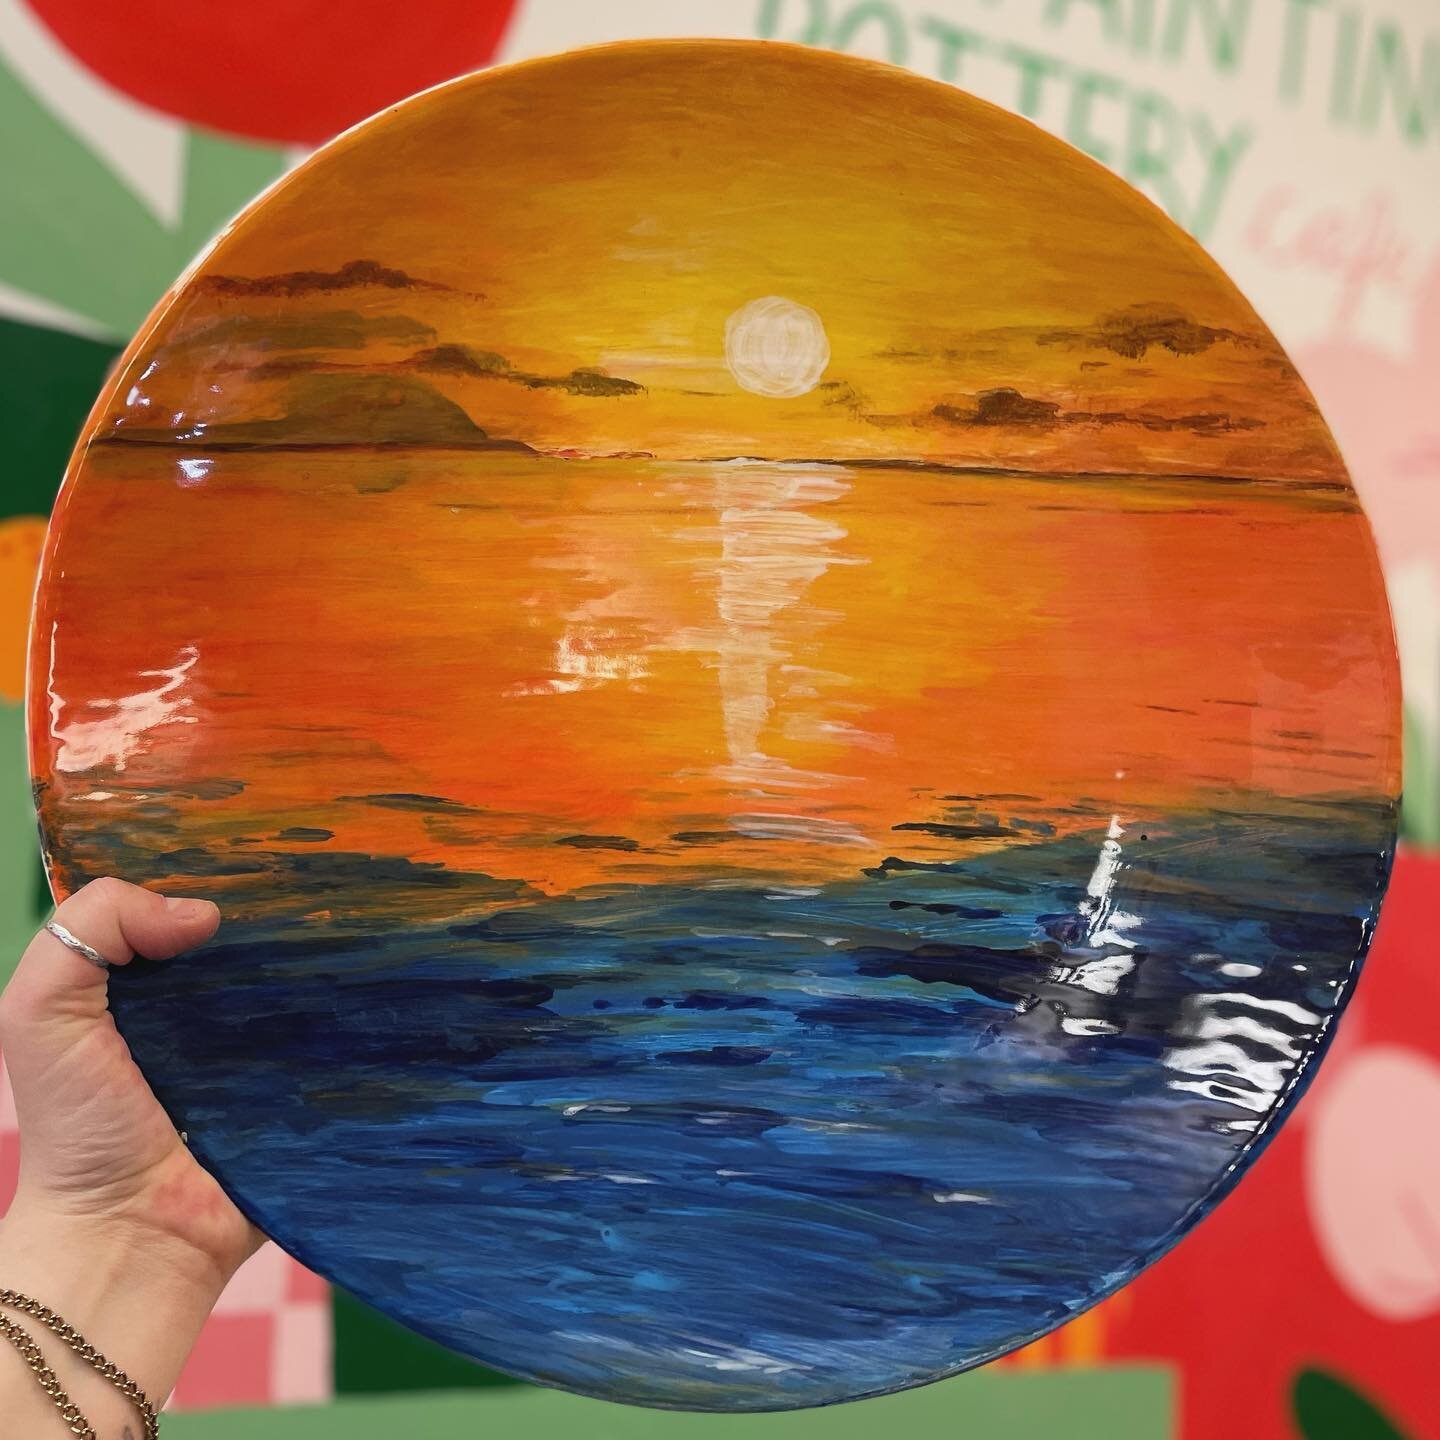 mind boggling what our customers manage to paint in 2 hours 🌅 #pottery#ceramics#brighton